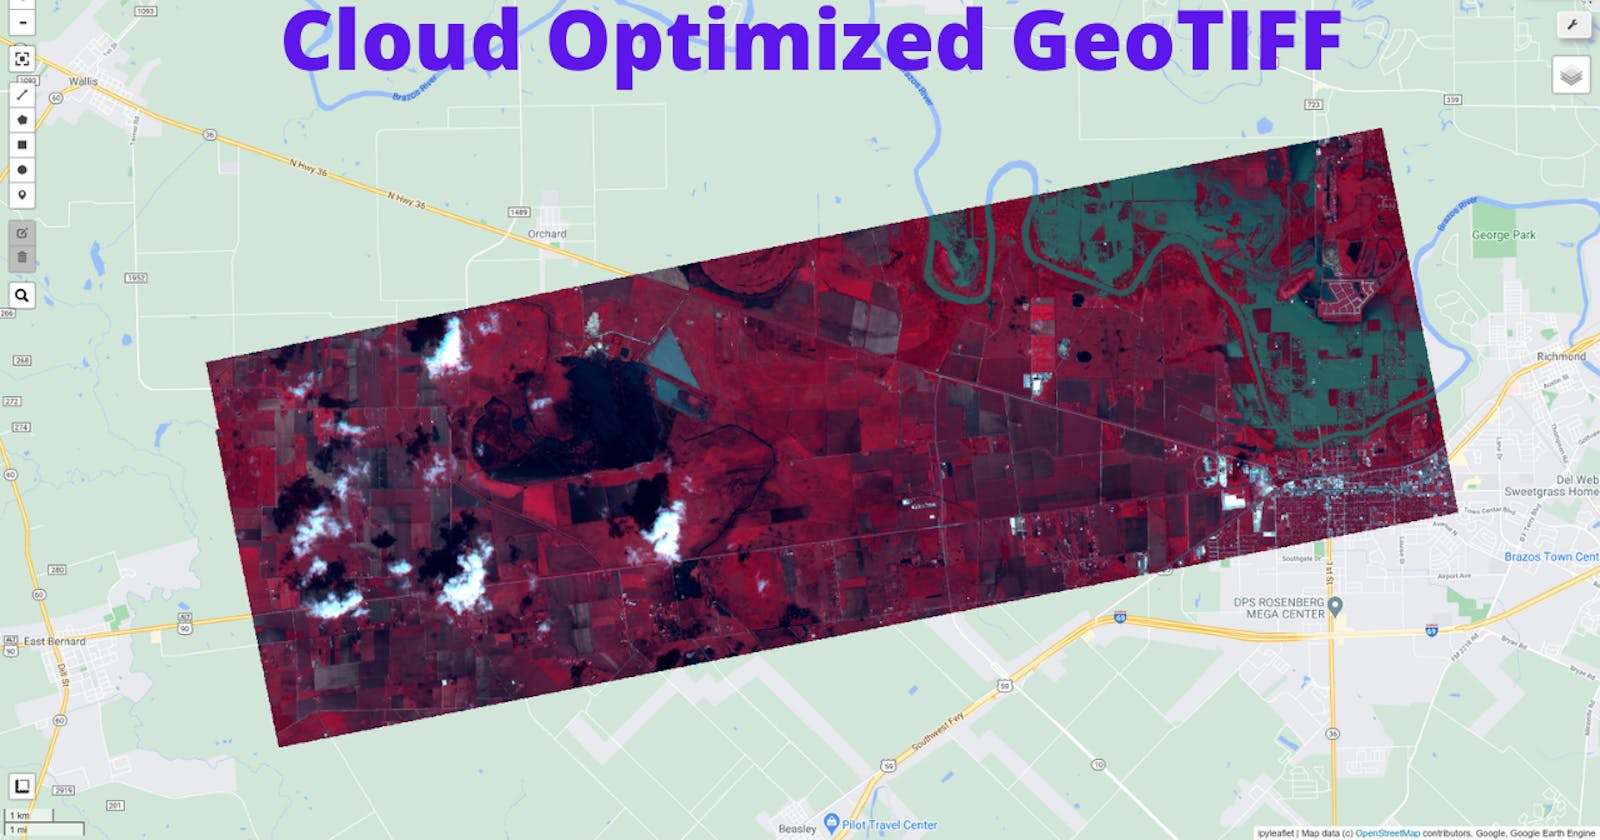 GEE Tutorial #38 - How to use Cloud Optimized GeoTIFF with Earth Engine